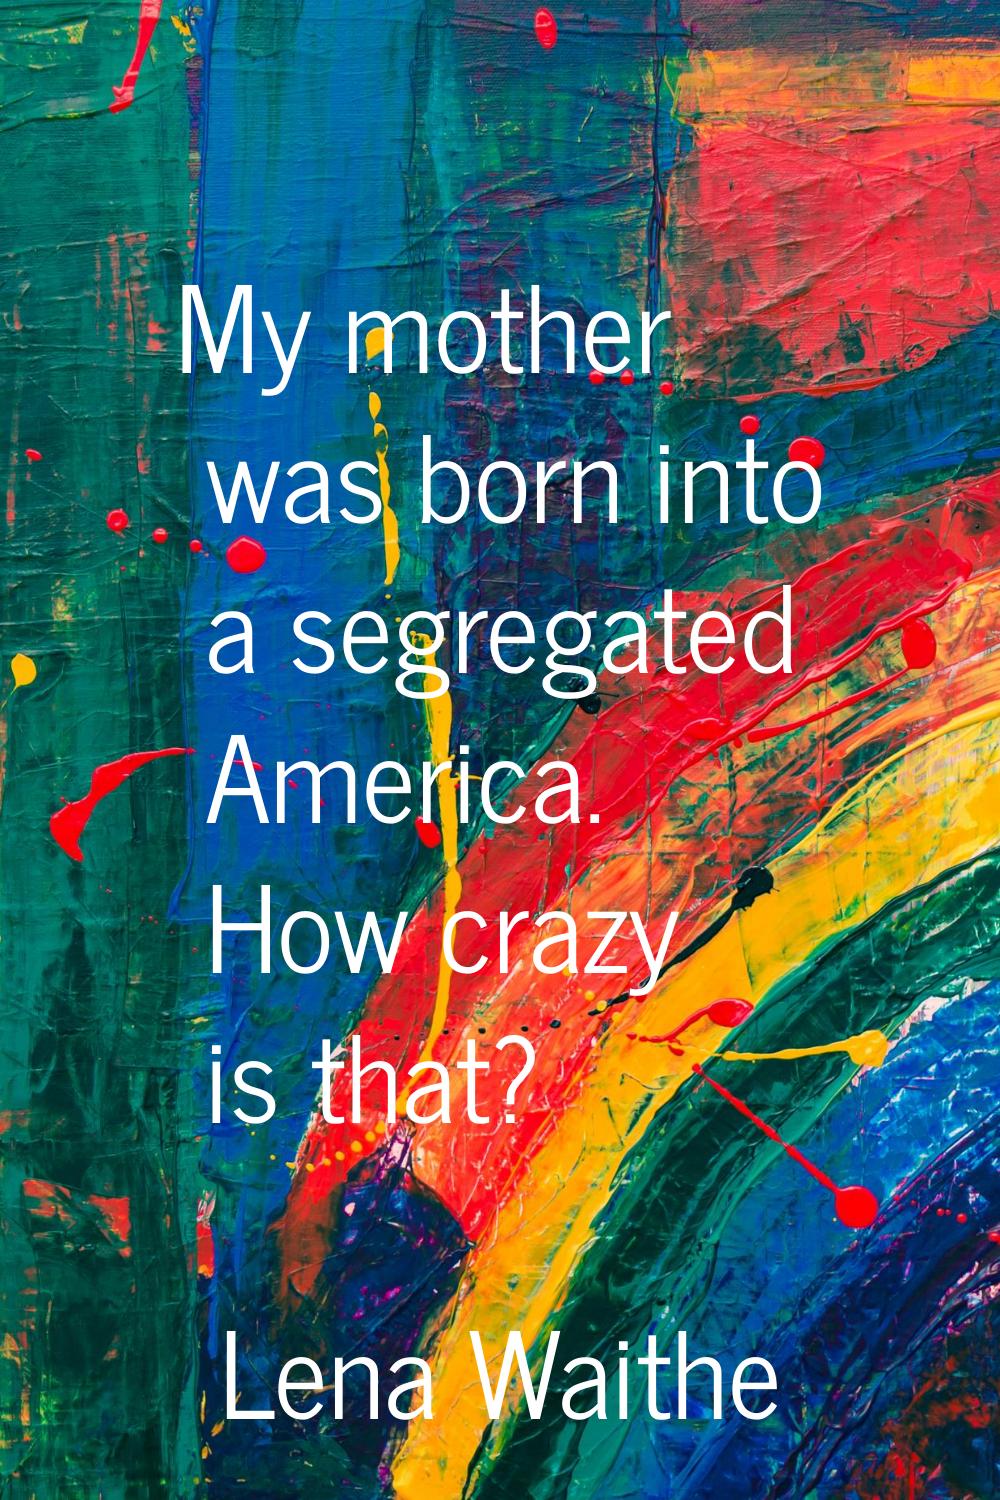 My mother was born into a segregated America. How crazy is that?